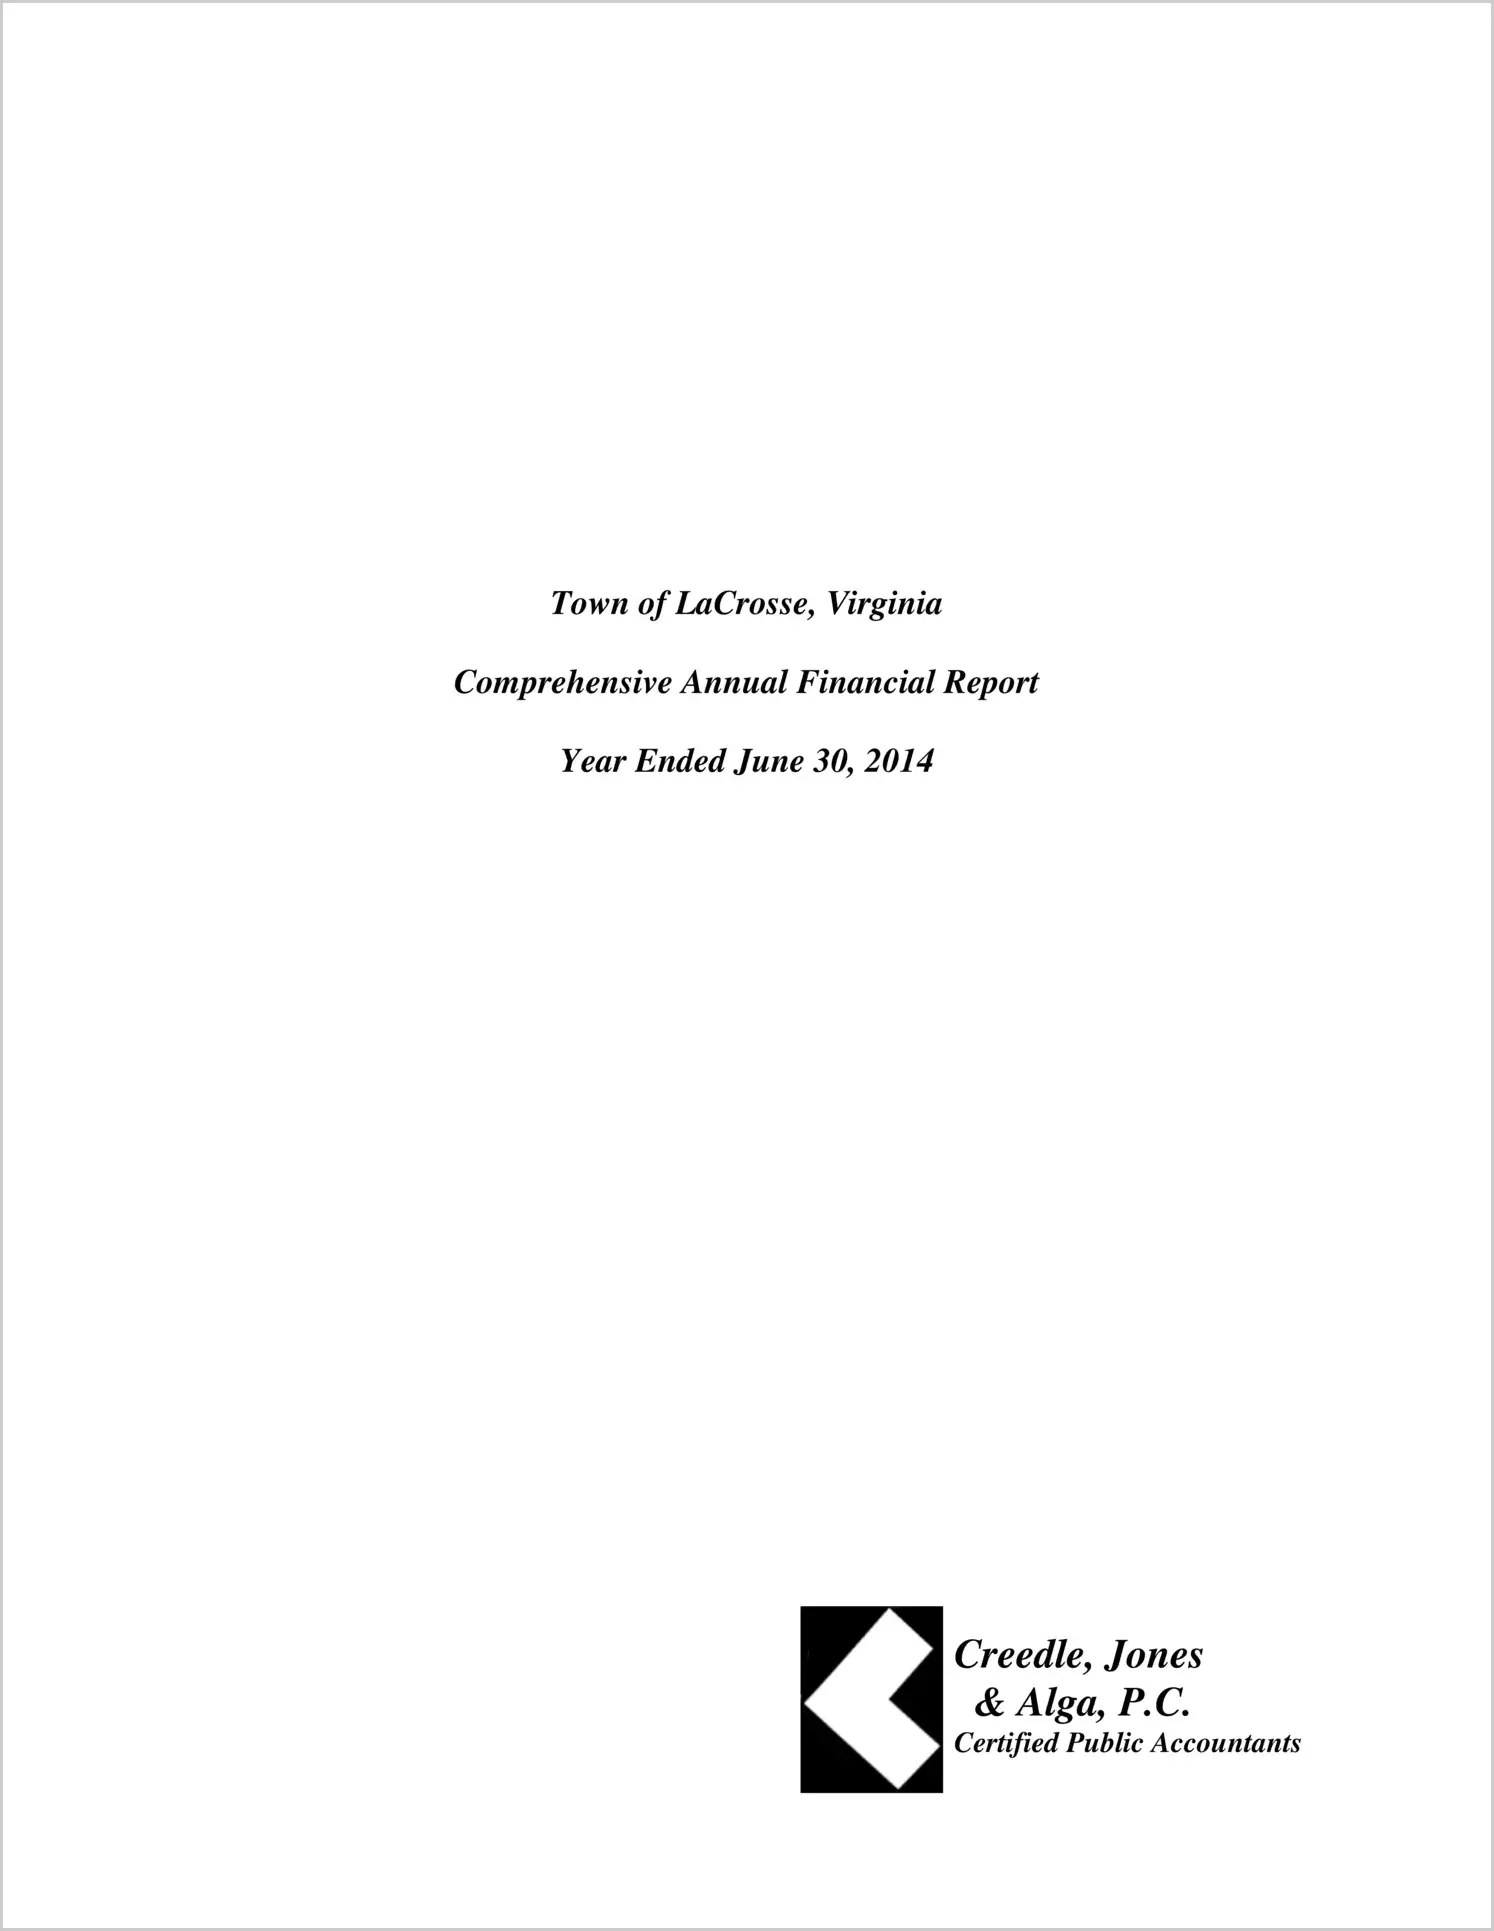 2014 Annual Financial Report for Town of La Crosse